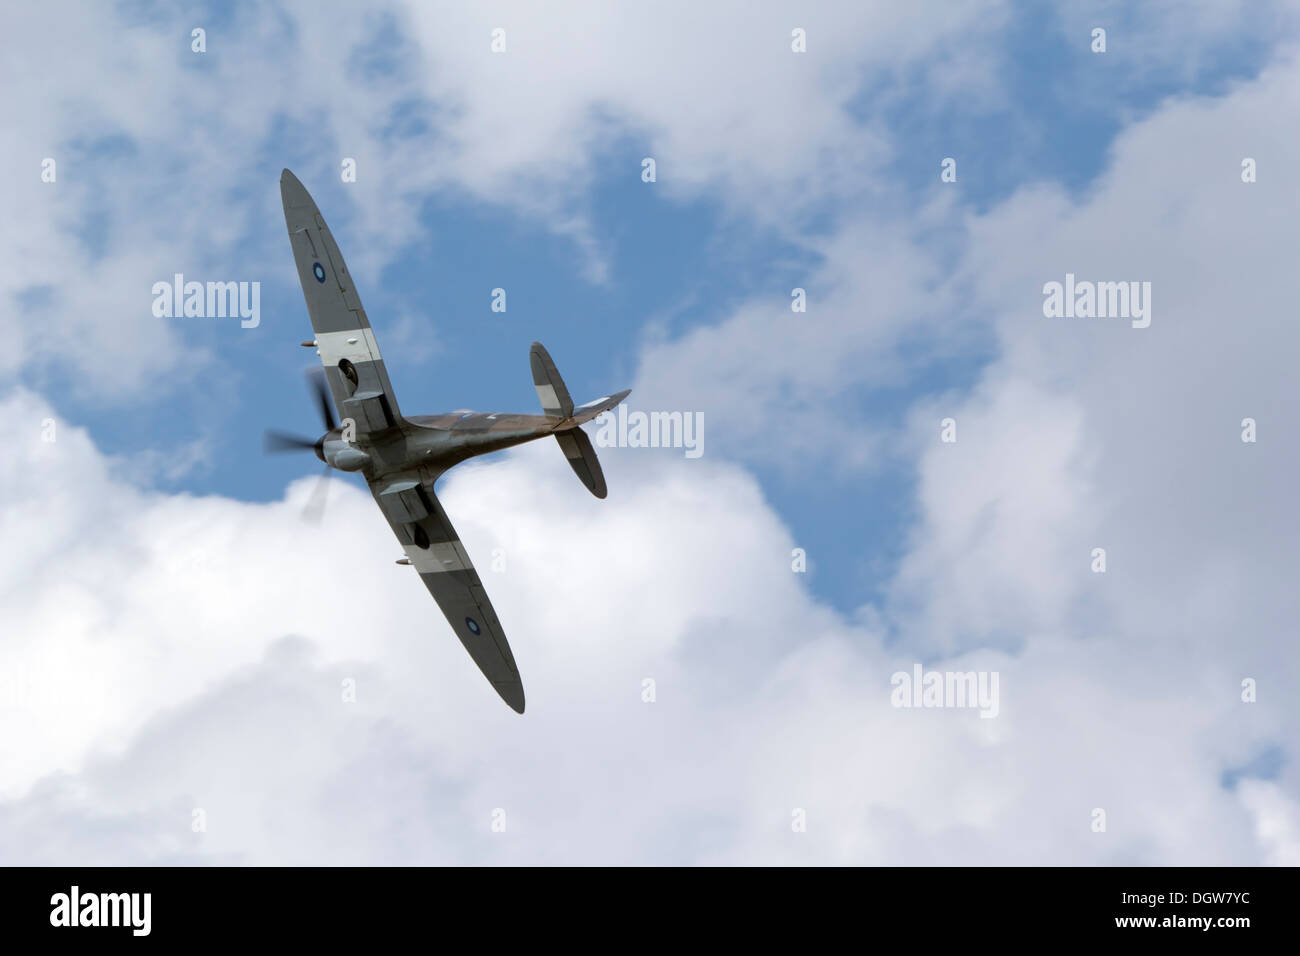 Mk. XIV Supermarine Spitfire in flight with Indian Air Force markings. Stock Photo